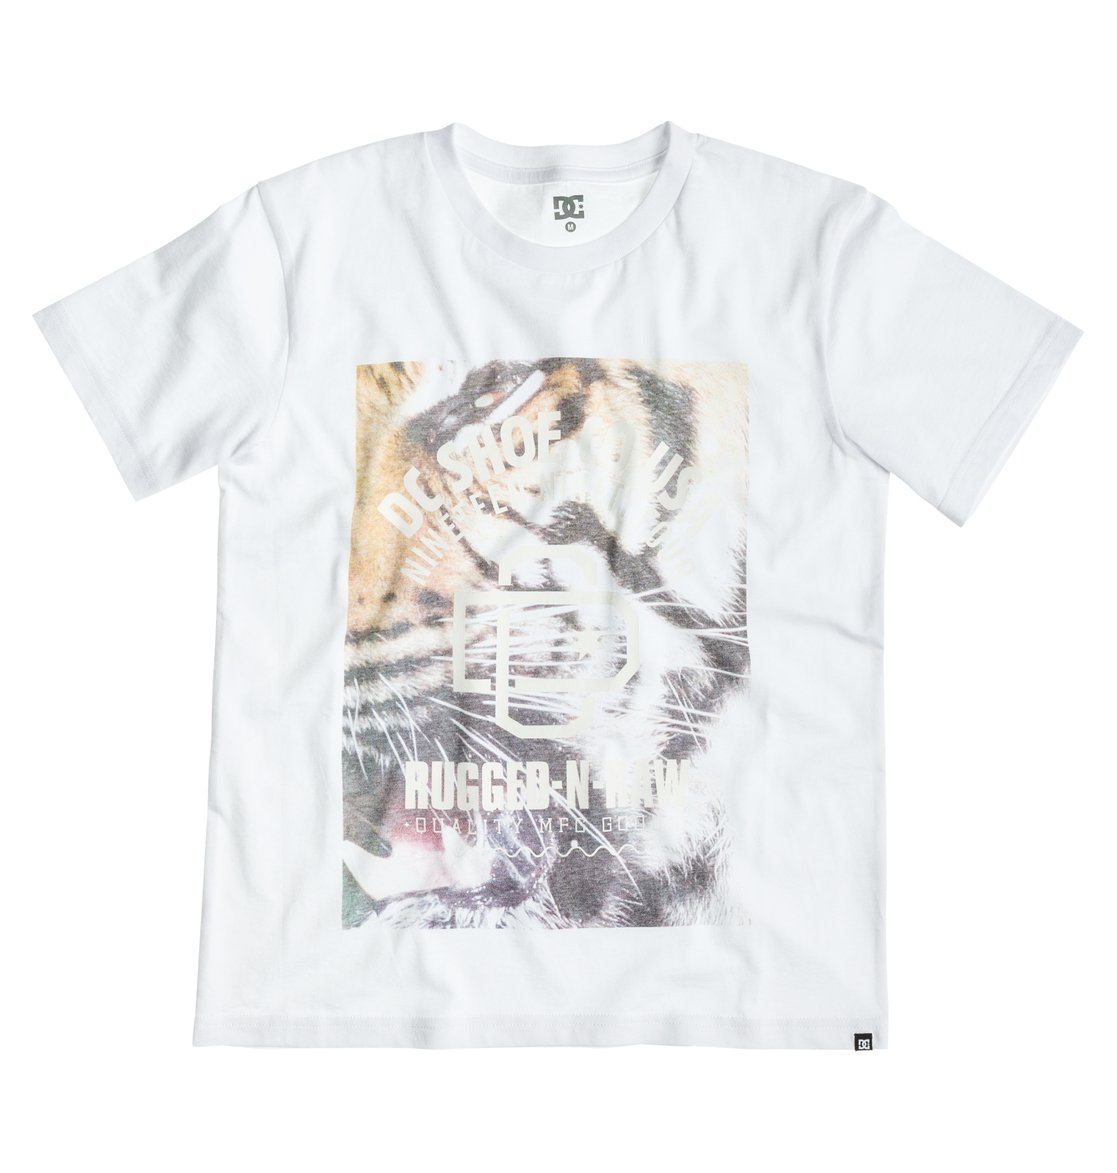 Raw Tiga Short Sleeve Boy - Dcshoes      Raw Tiga SS BY  DC Shoes -     2015. :  ,     Softhand Ink.<br>